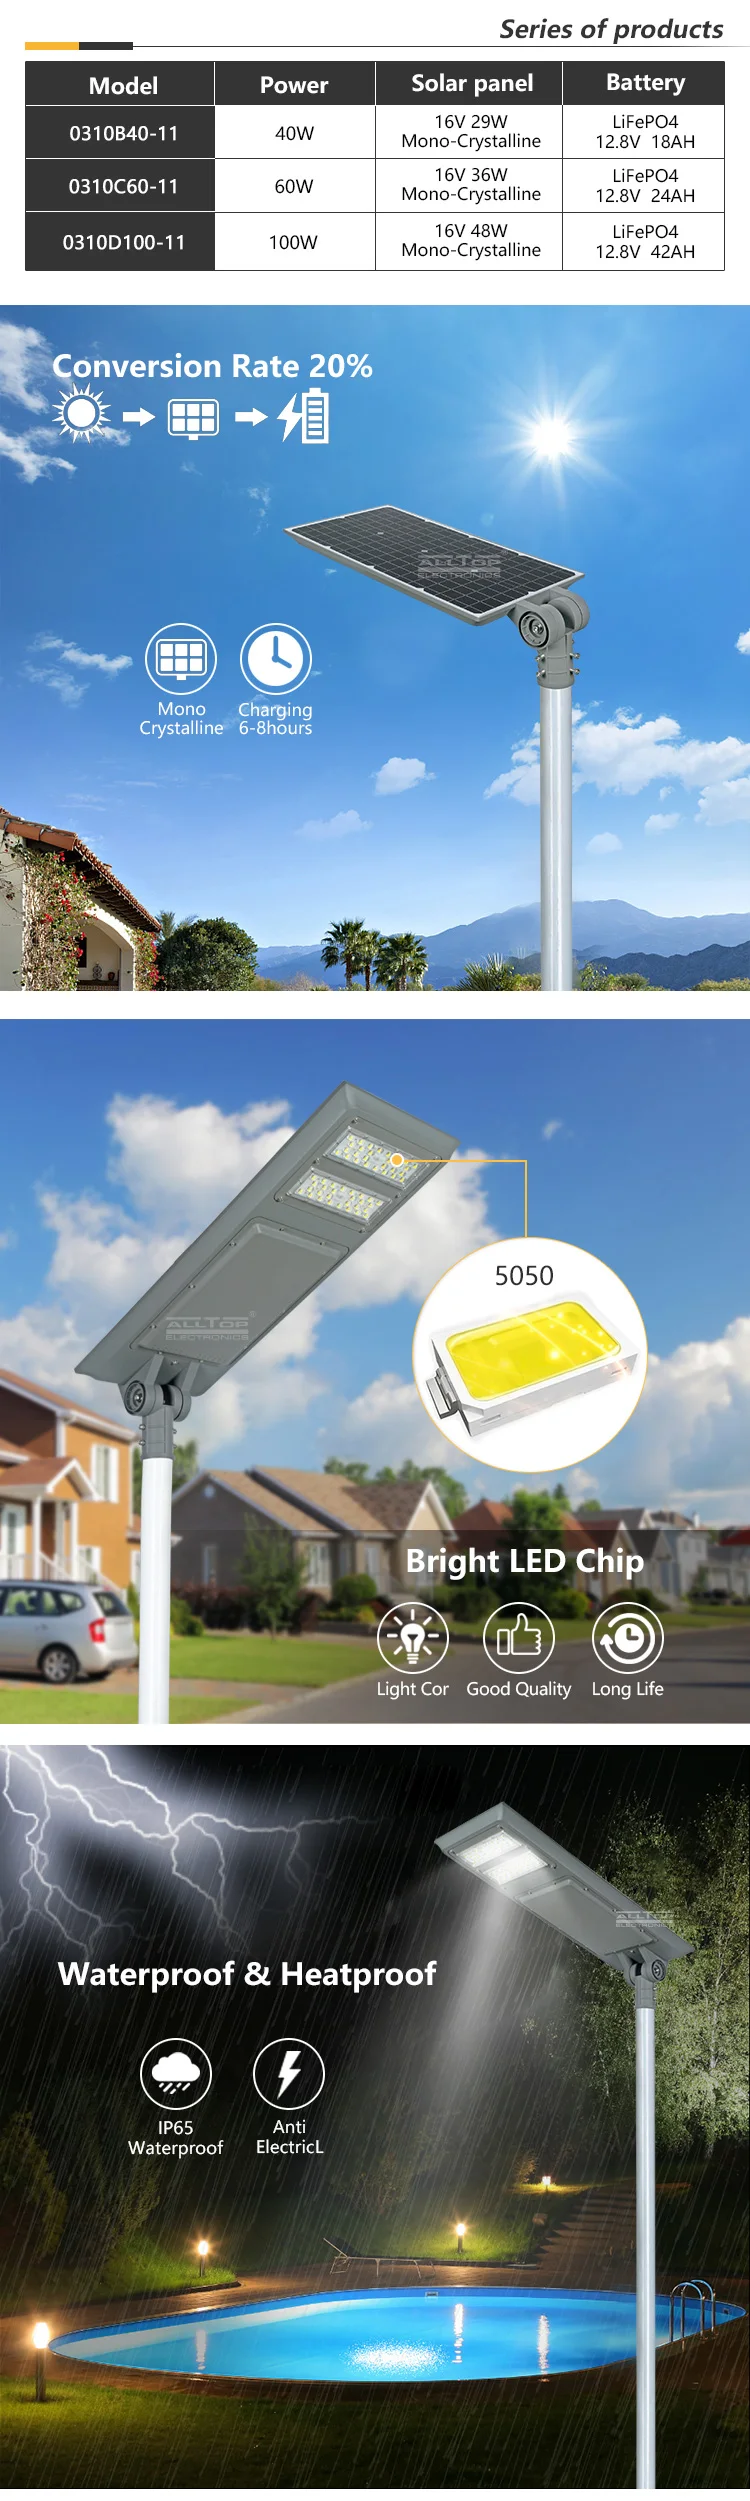 ALLTOP IP65 waterproof smd 40w 60w100w integrated all in one led solar street light